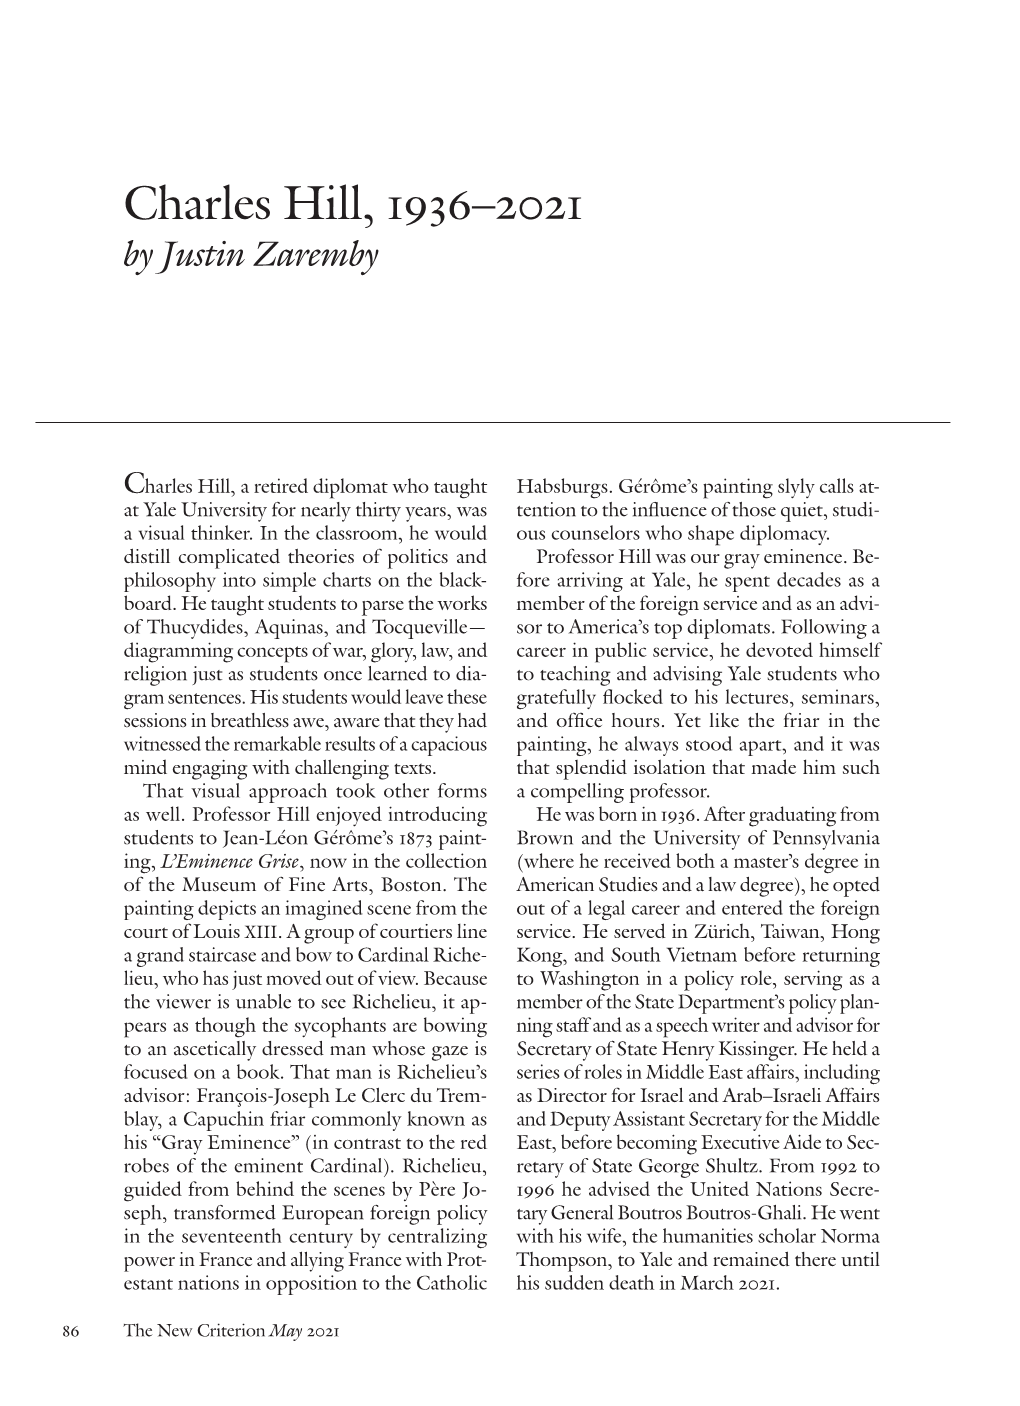 Charles Hill, 1936-2001